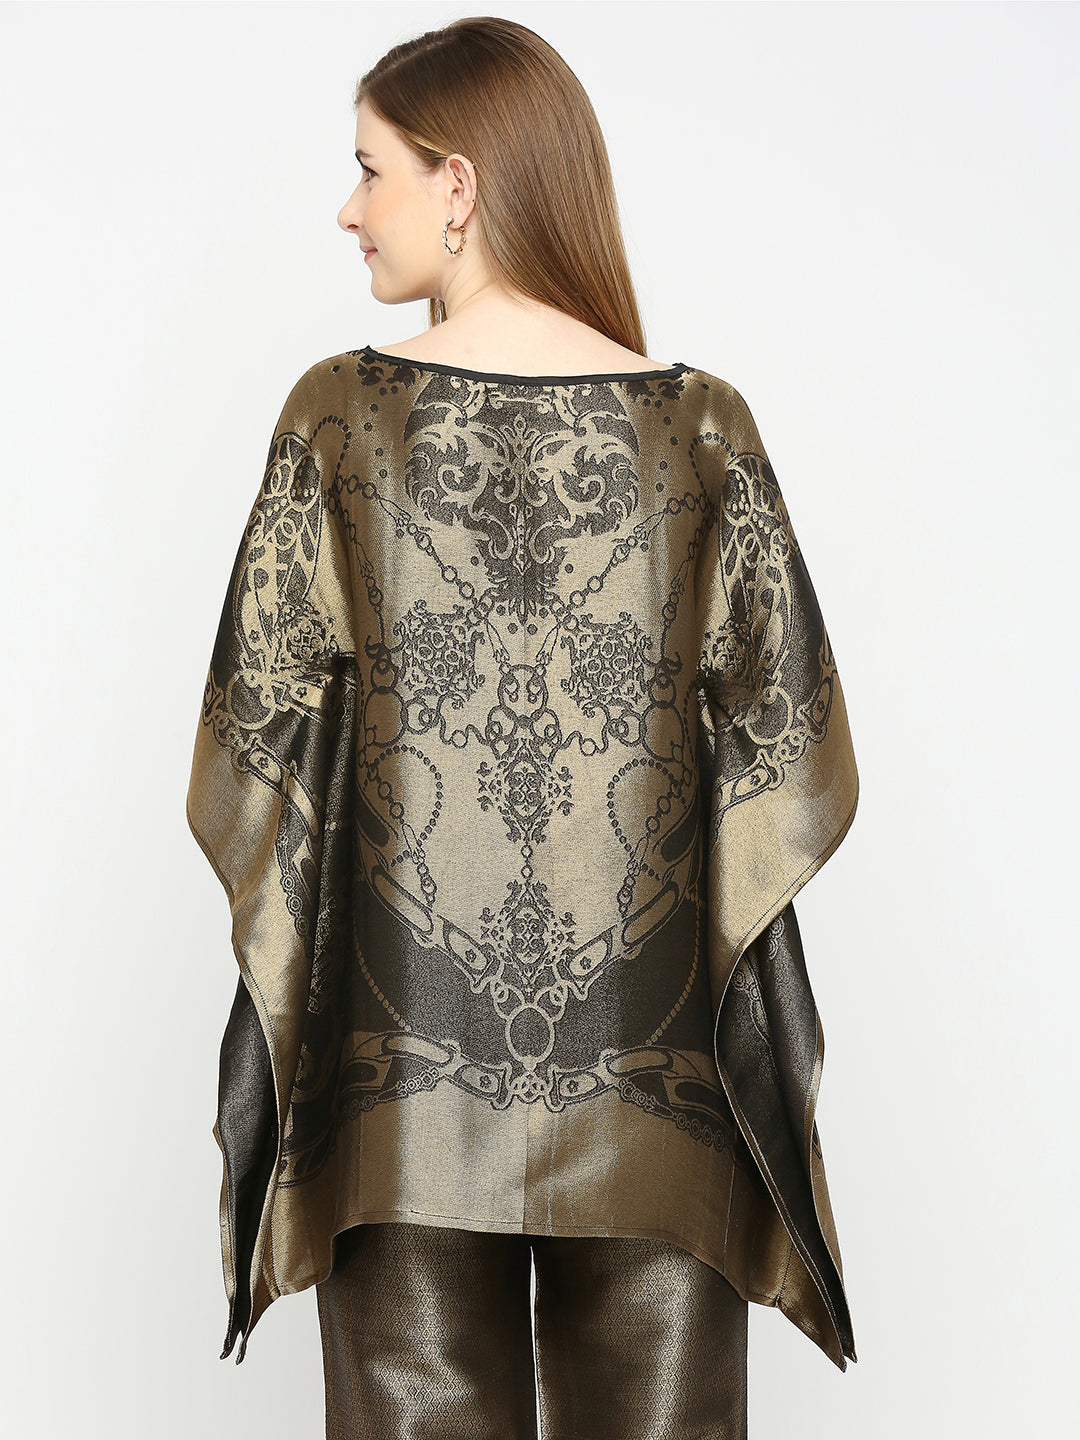 French Rope & Chains Patterned Black Brocade short Kaftan